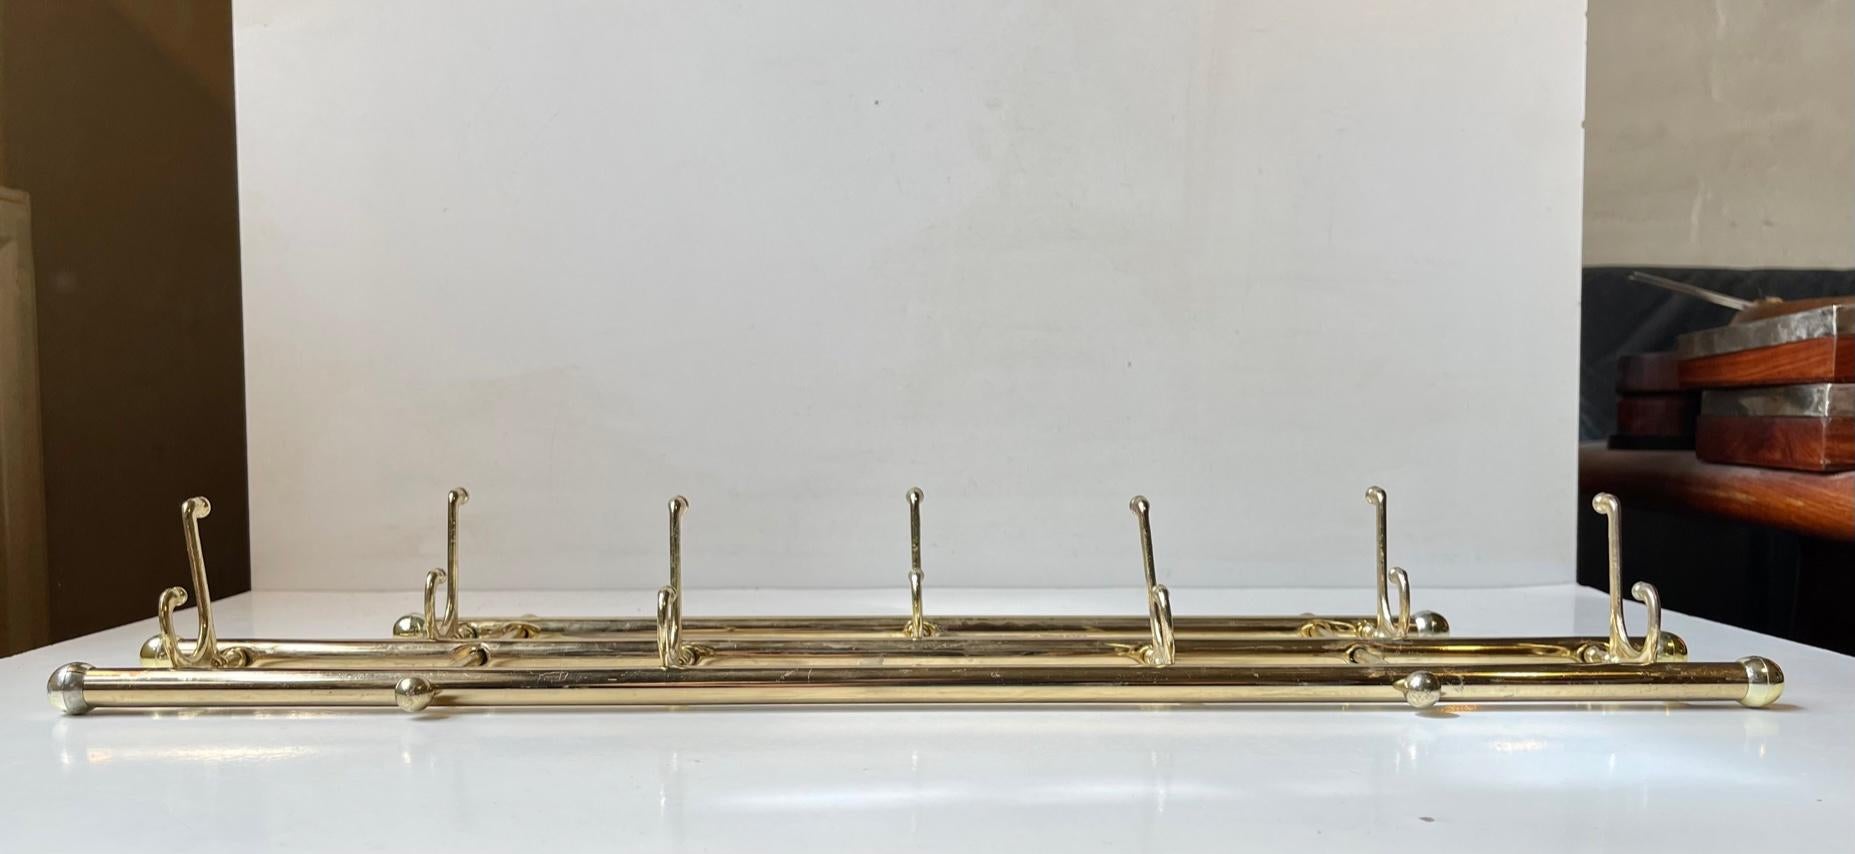 Decorative towel, kitchen or small coat rack with 5 articulating/foldable double hooks. It made from gold chromed metal, brass and plastic. Unknown maker circa 1970-80. Measurements: w/l: 55 cm, h: 18 cm, Dept: 2 cm